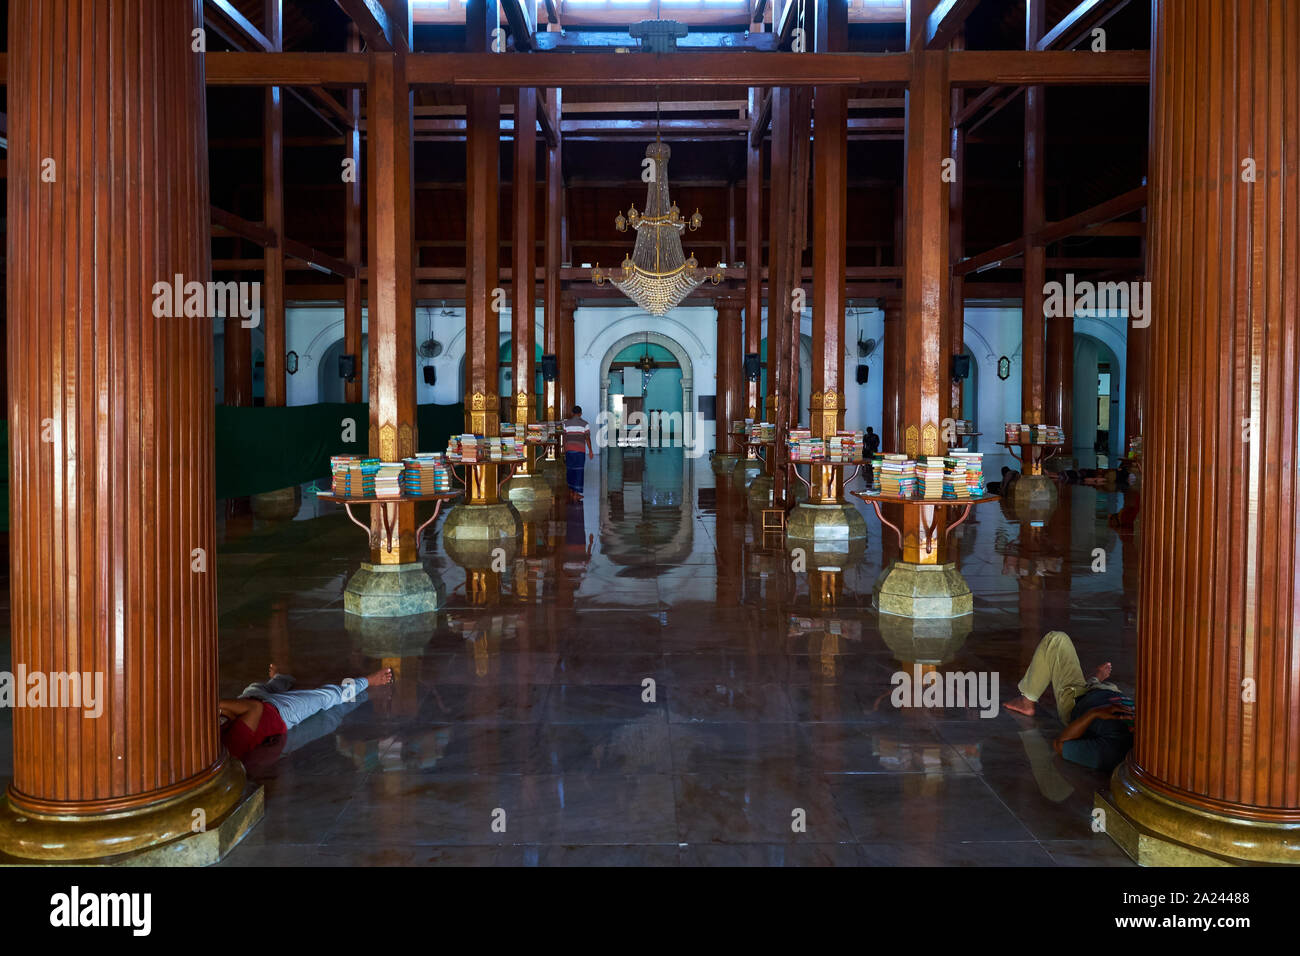 Main wood interior of the old, central mosque, Sunan Ampel. In Surabaya, Indonesia. Stock Photo